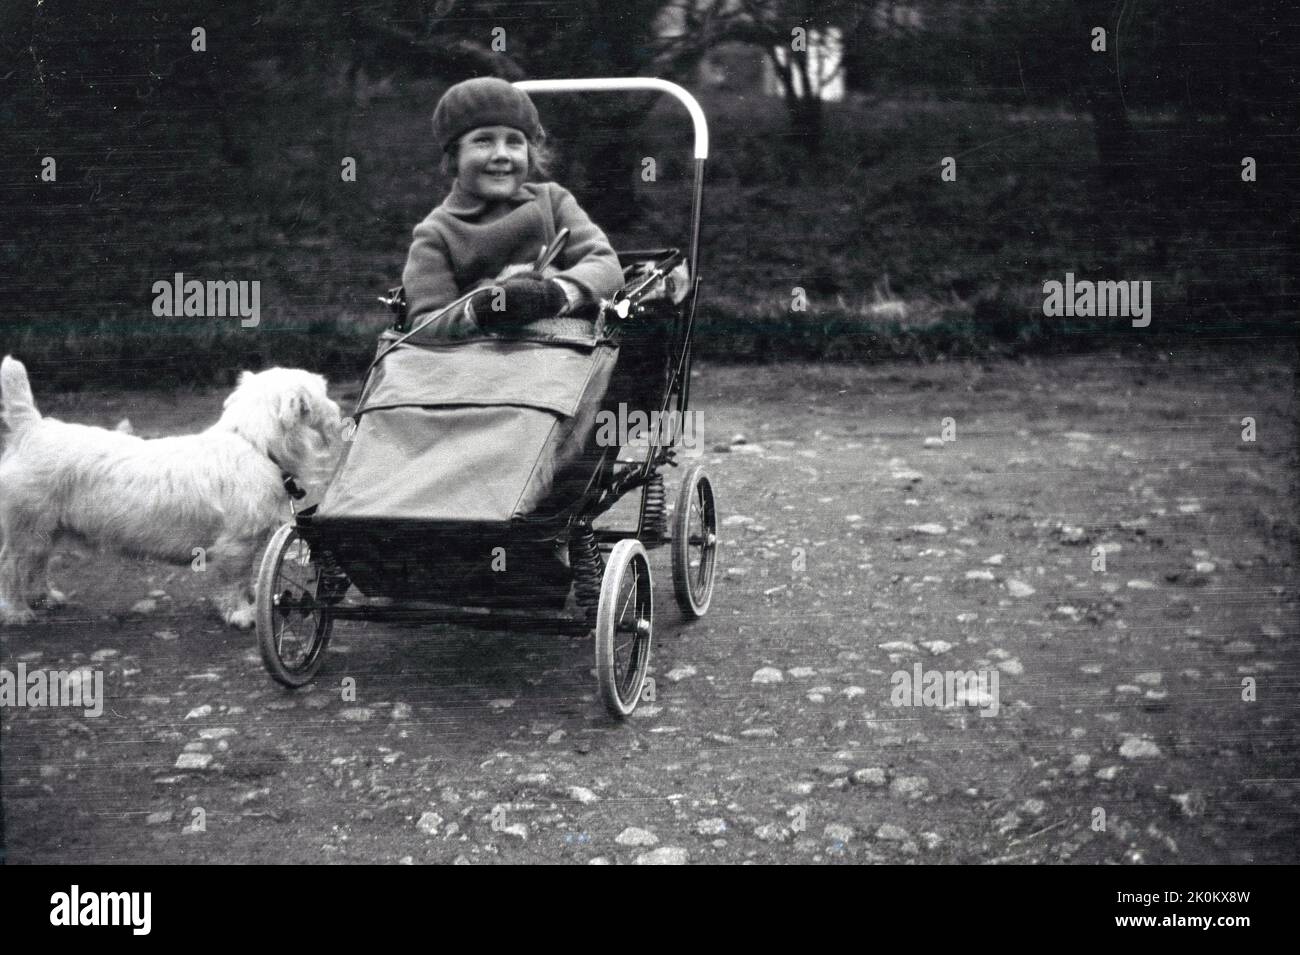 1932, historical, outside on rough ground, a young girl sitting in a pushchair of the era, with coiled sprung suspension, holding onto the lead of her pet scottie dog, England, UK. Stock Photo